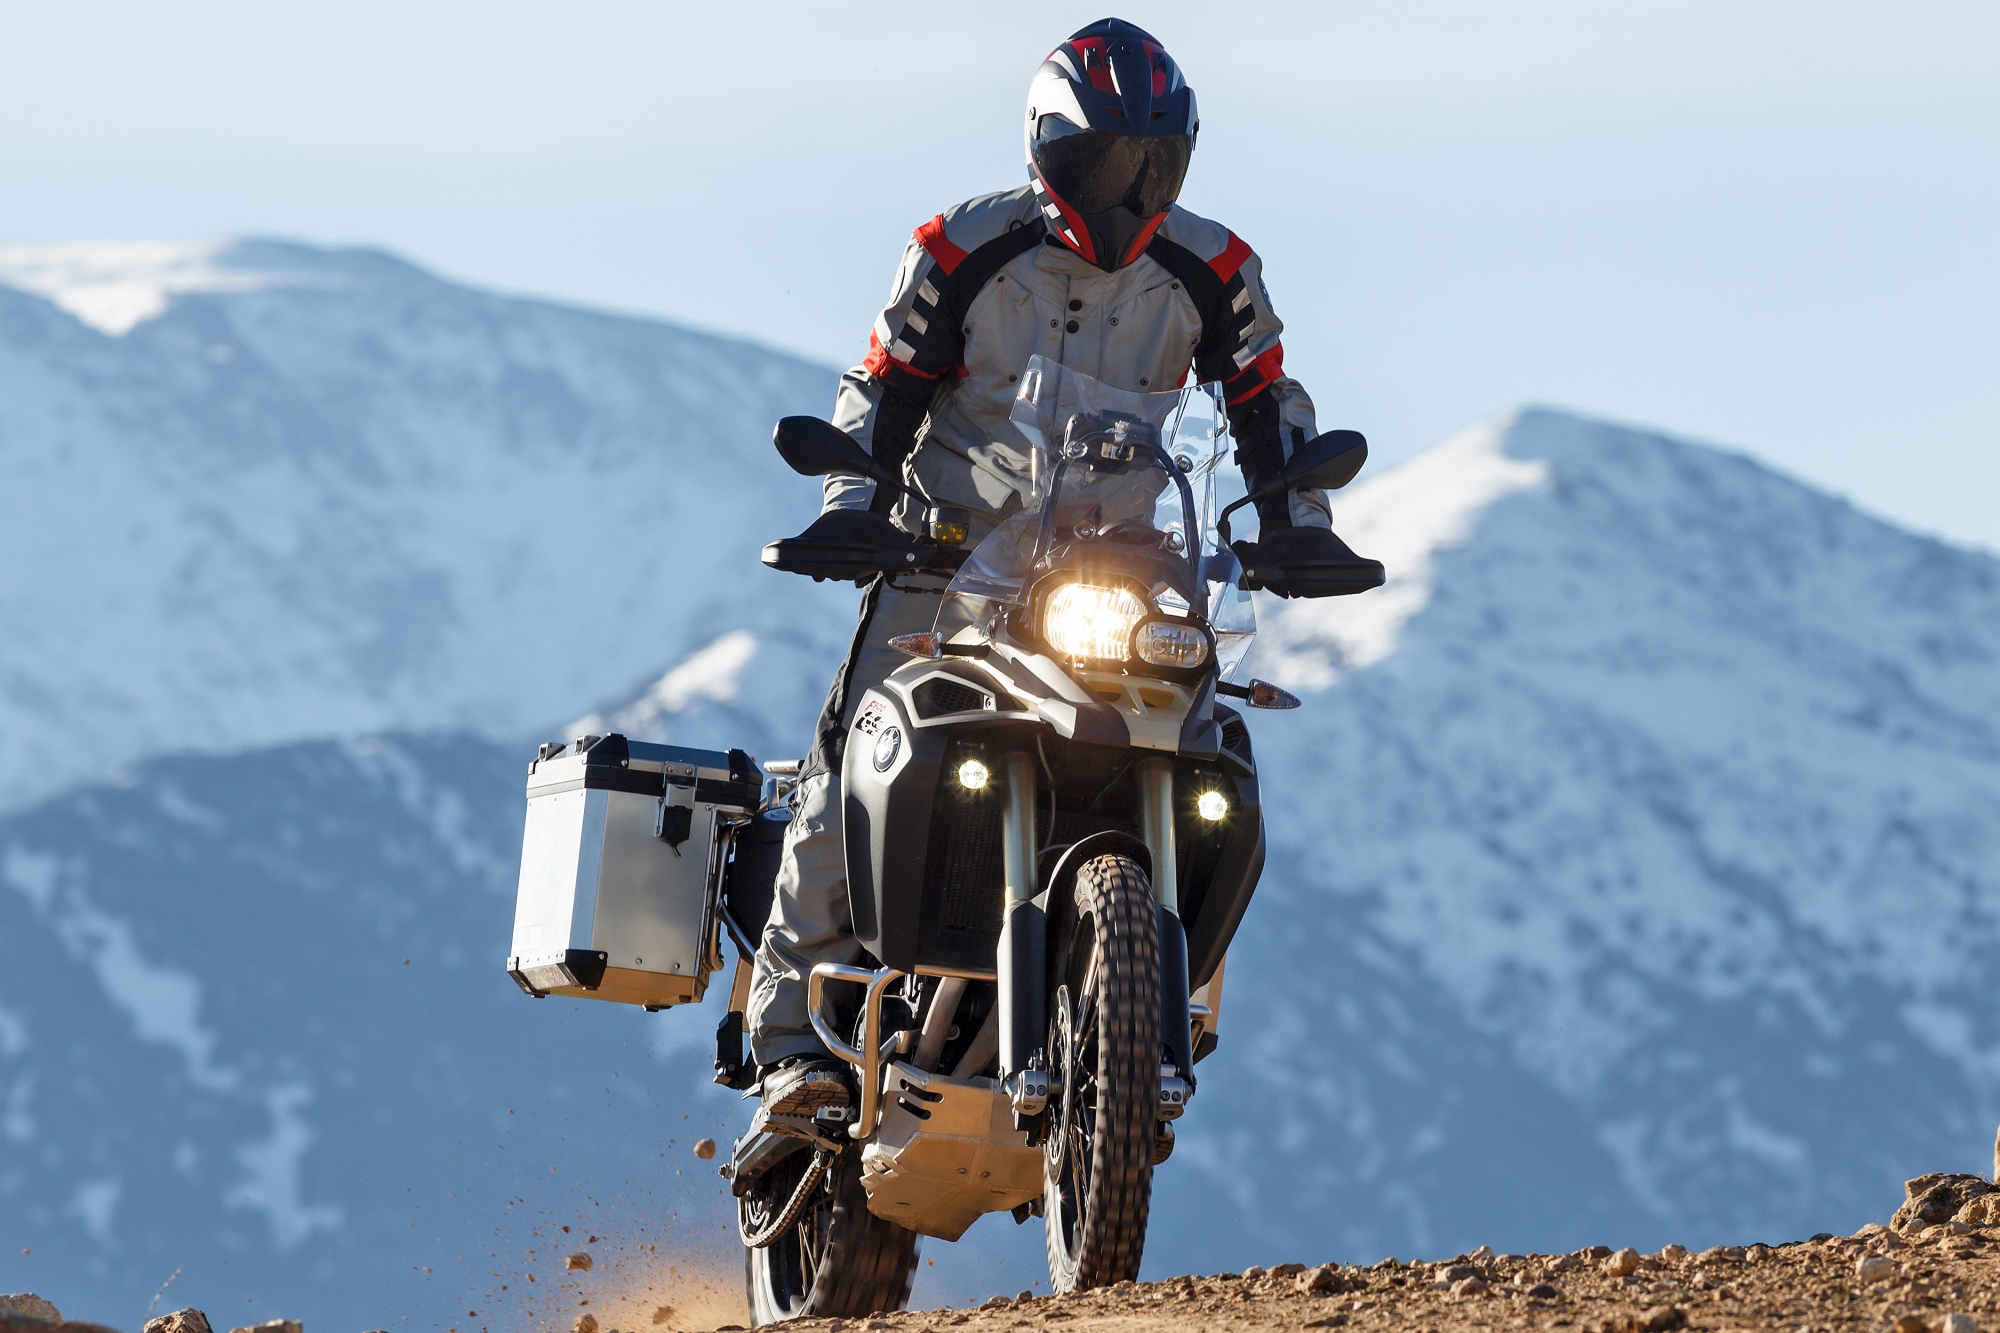 Look out! 2013 BMW F800GS Adventure revealed